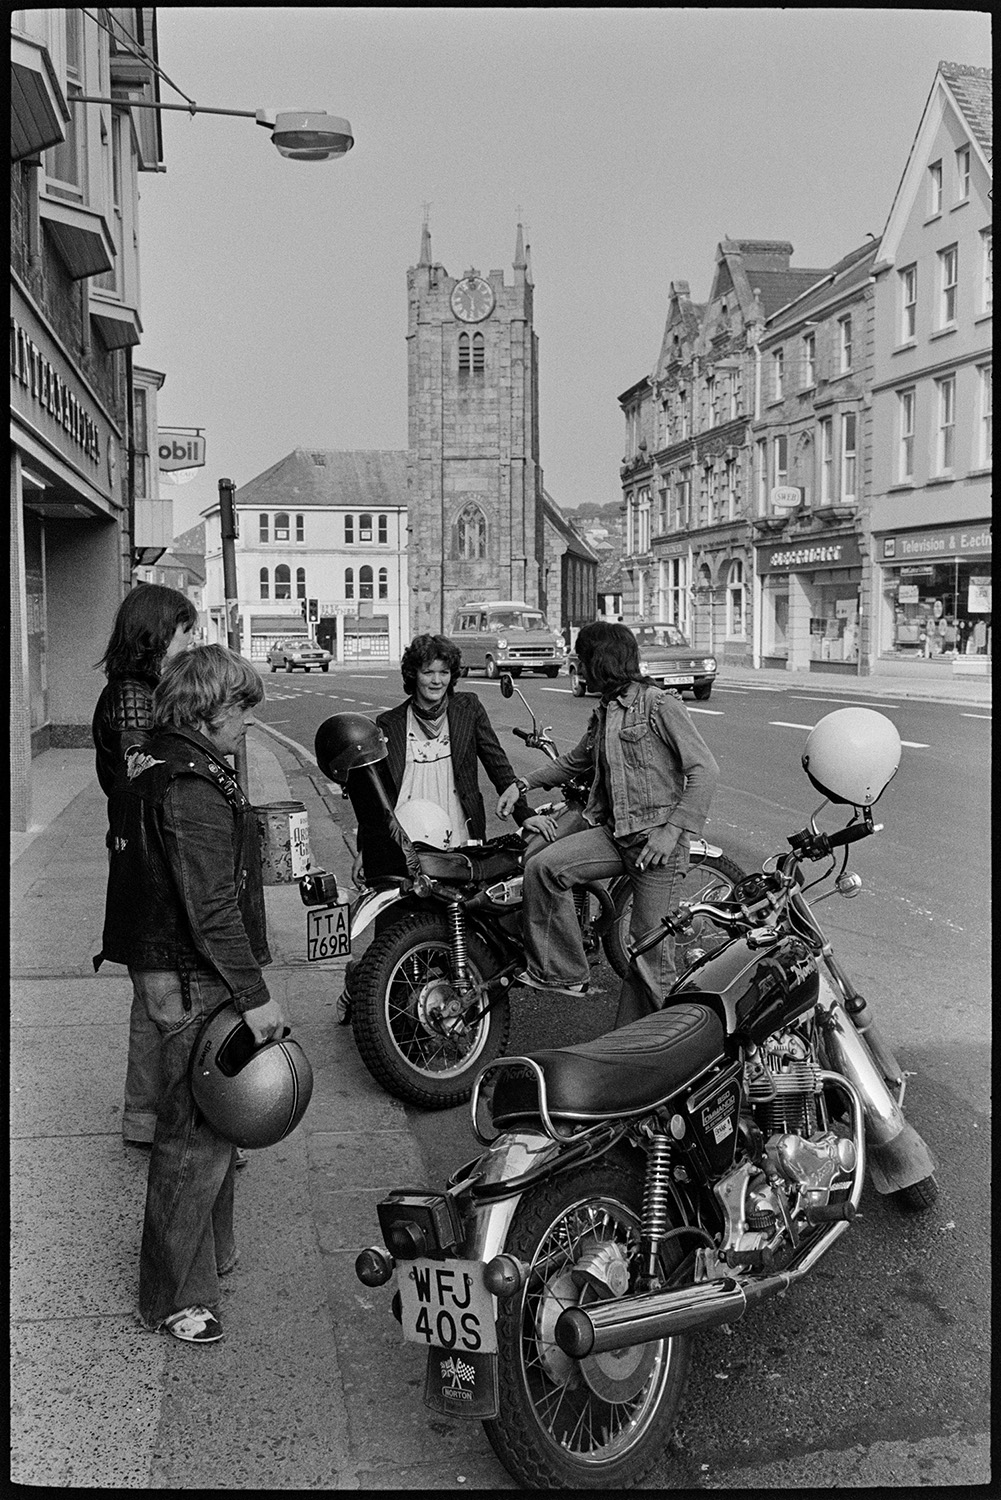 Motorcyclists parked in town. 
[Motorcyclists talking by their motorbikes which are parked on the side of a road in Okehampton. Shop fronts and a church tower can be seen in the background.]